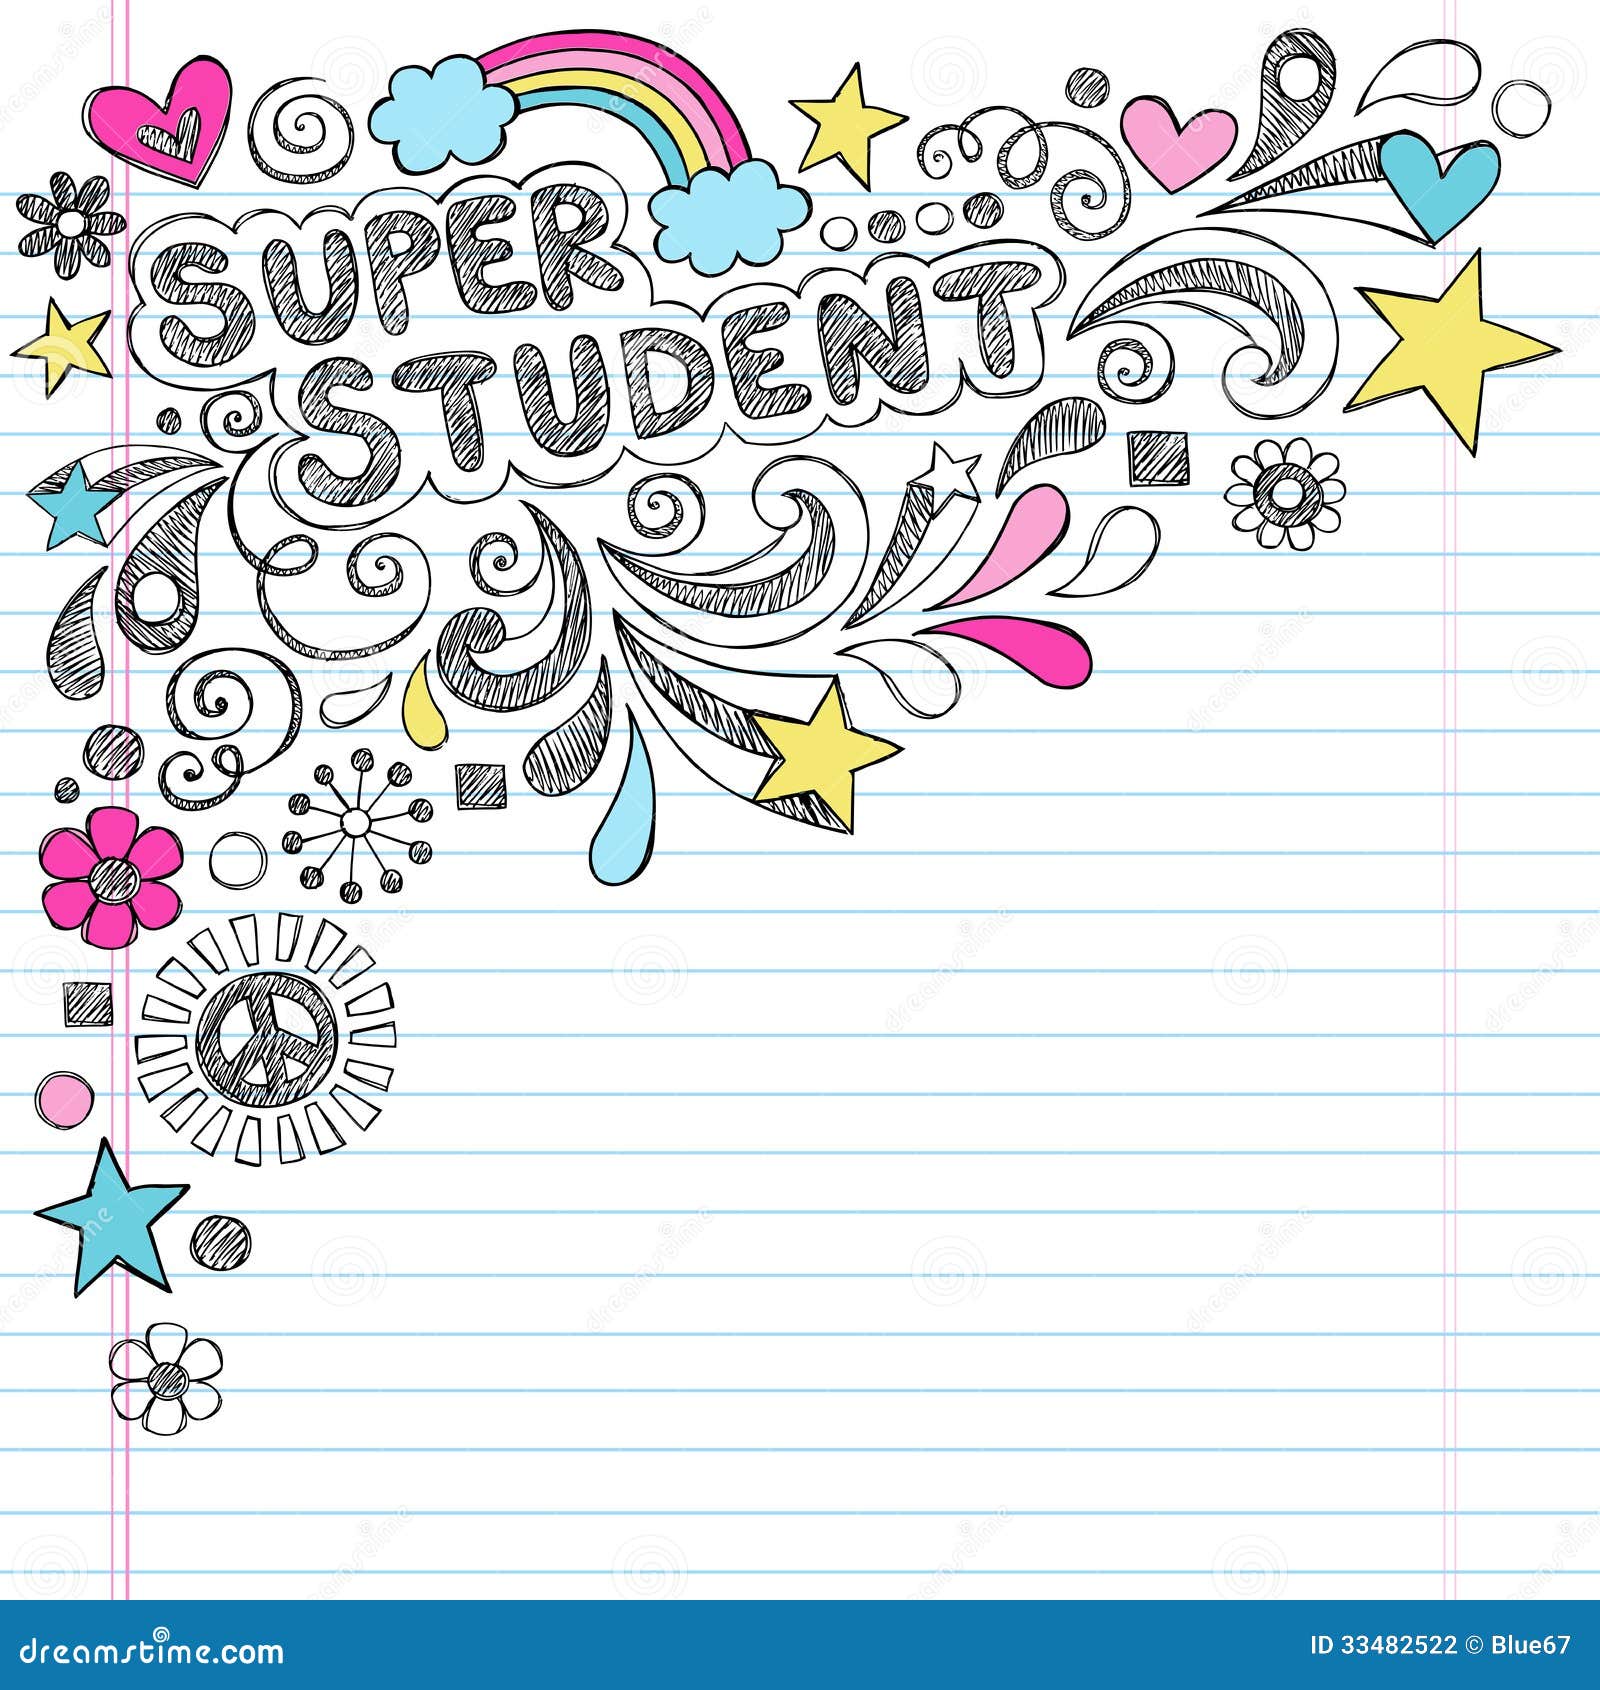 Super Student Back To School Sketchy Doodles Vecto Stock Photography - Image: 334825221300 x 1390